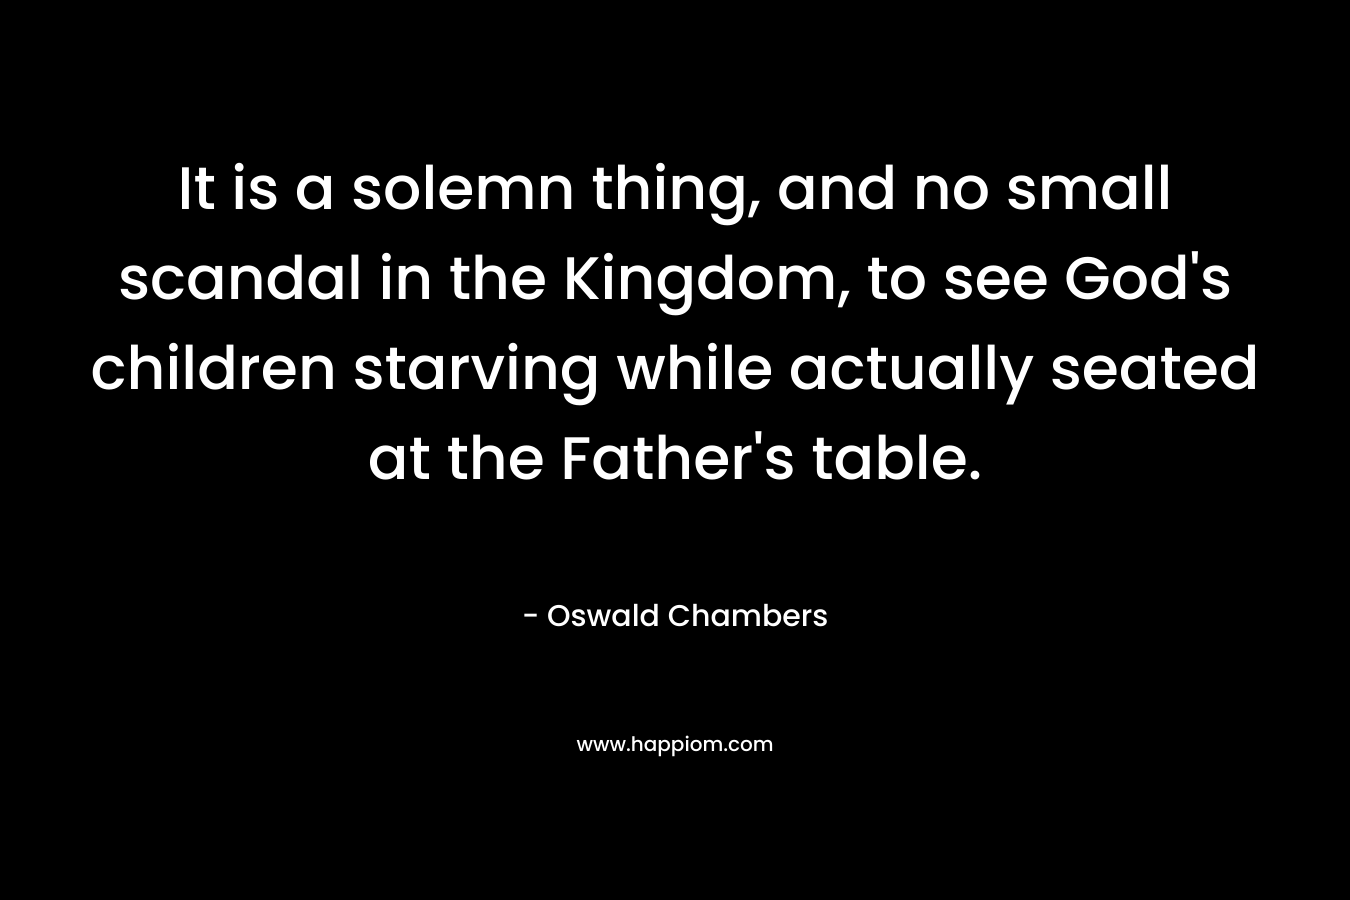 It is a solemn thing, and no small scandal in the Kingdom, to see God’s children starving while actually seated at the Father’s table. – Oswald Chambers